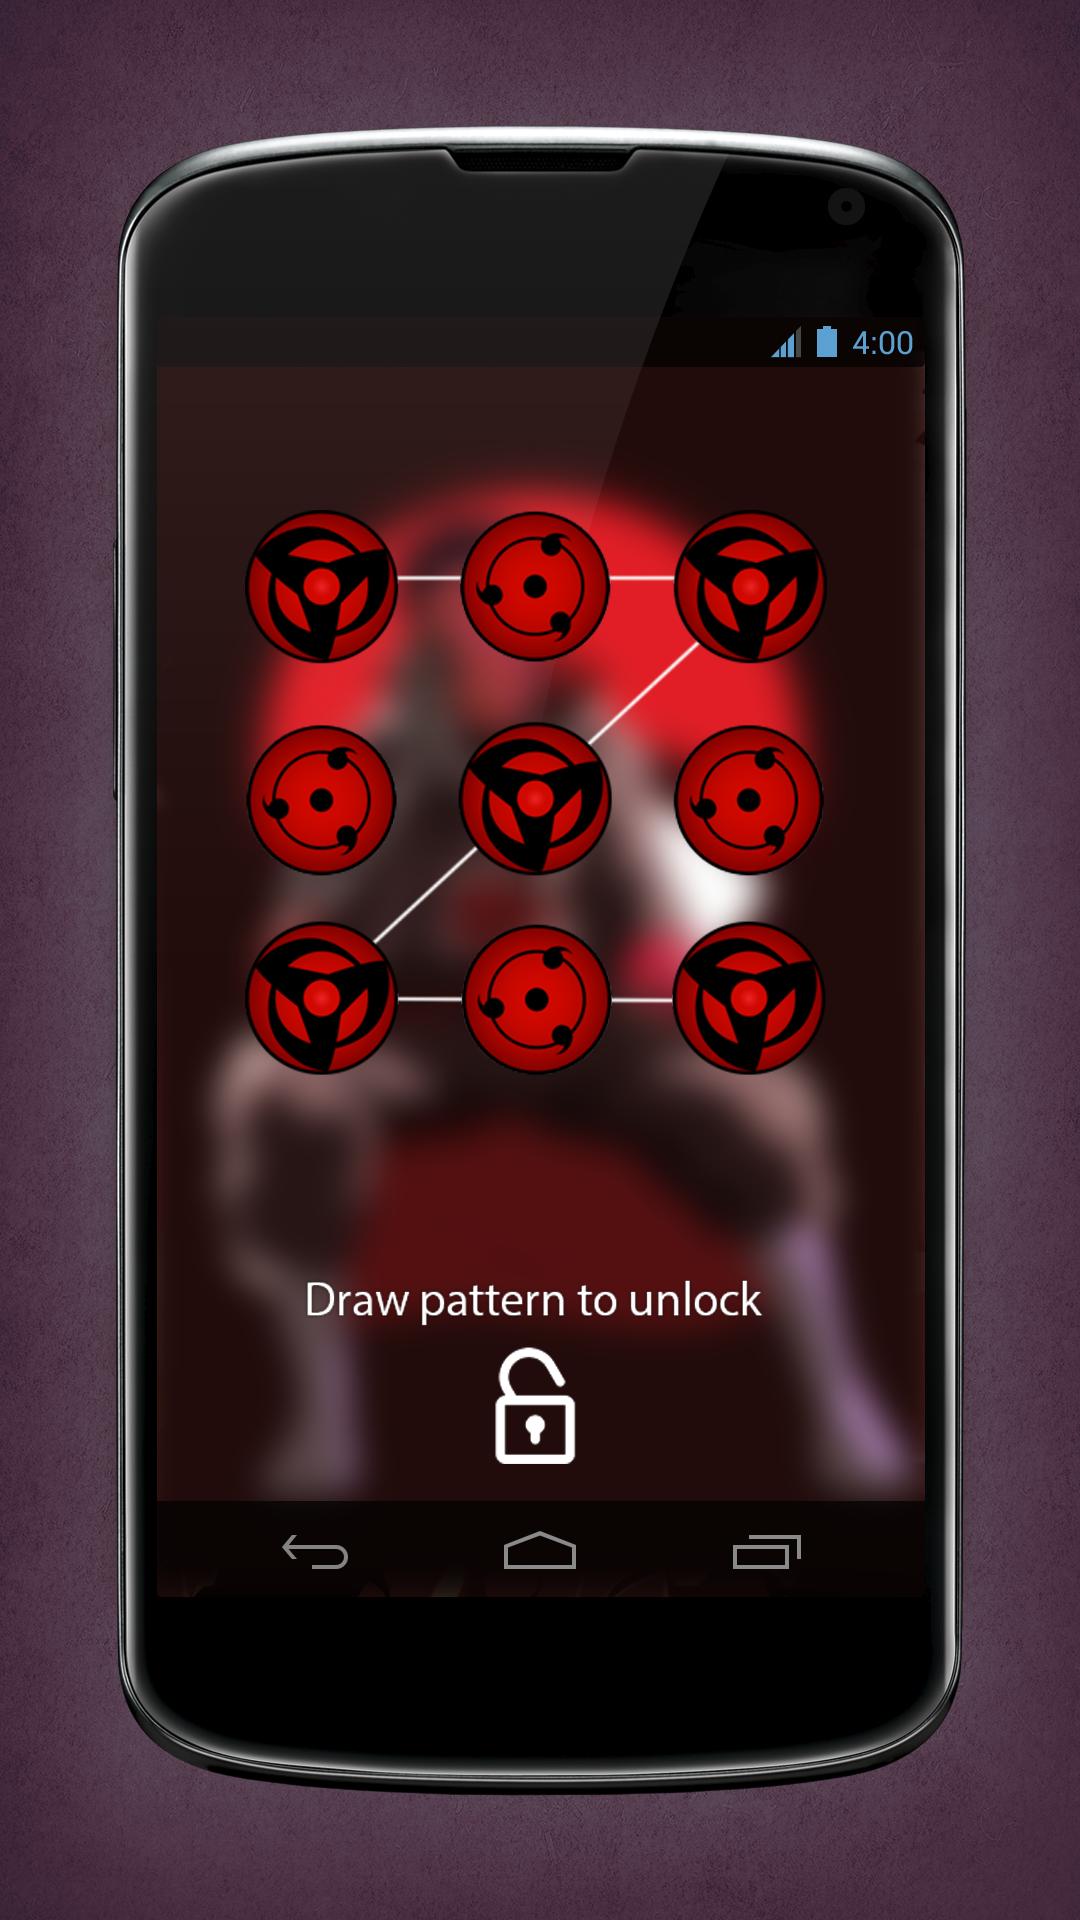 Tobi Obito Uchiha Anime Lock Screen & Wallpapers for Android - APK Download